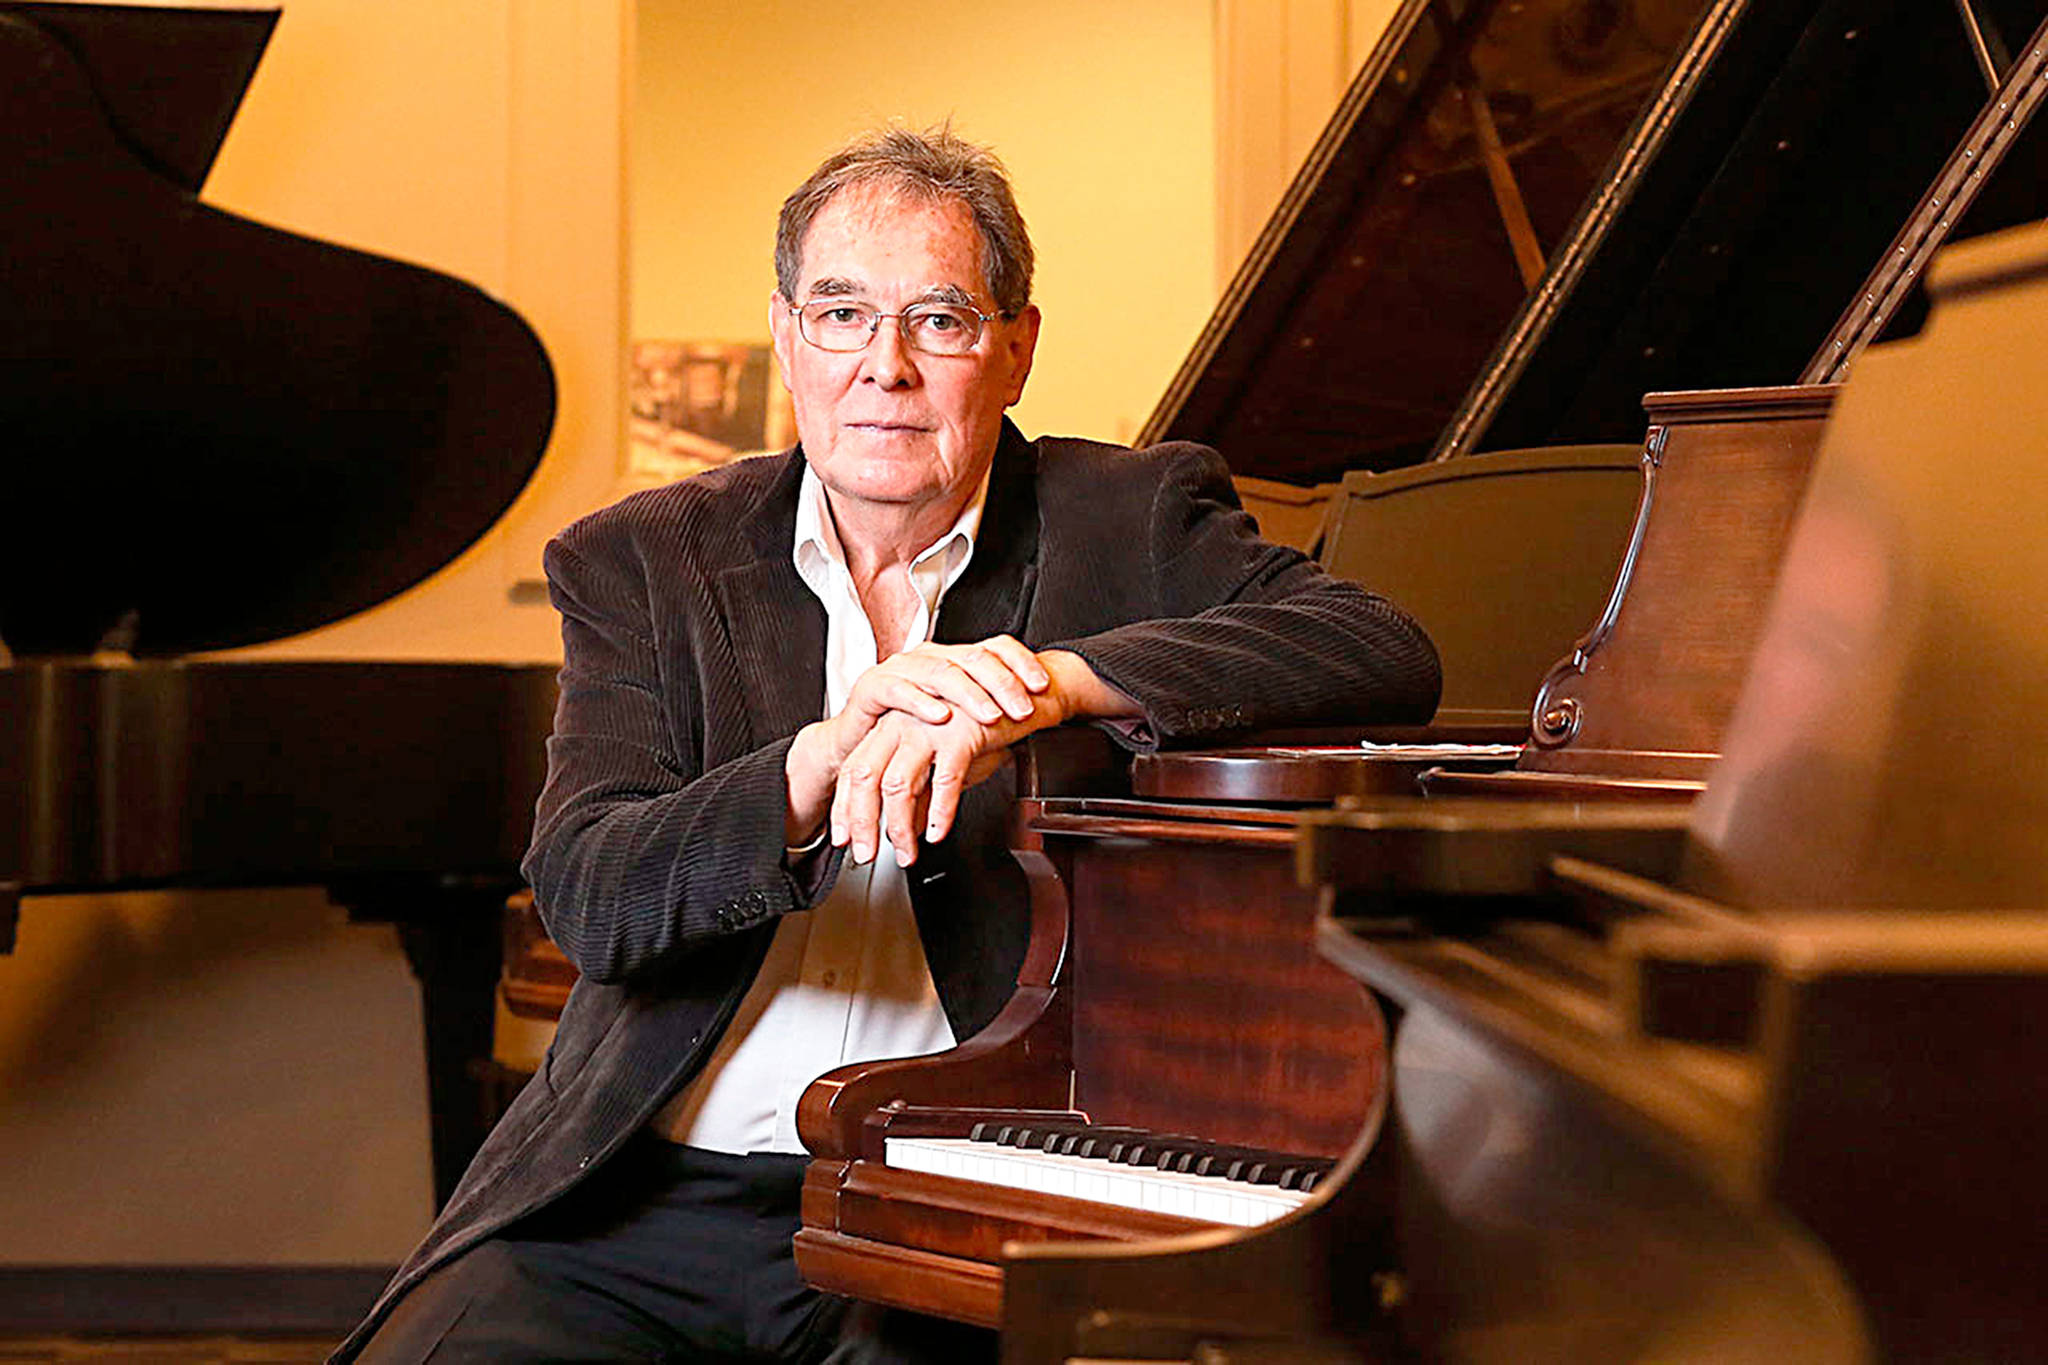 Lloyd Boyd has become Whidbey’s Piano Man following the death of his brother, Ronald Boyd, who stored his collection of Steinways and other rebuilt grand pianos in Greenbank. Photo by Kevin Clark/The Herald